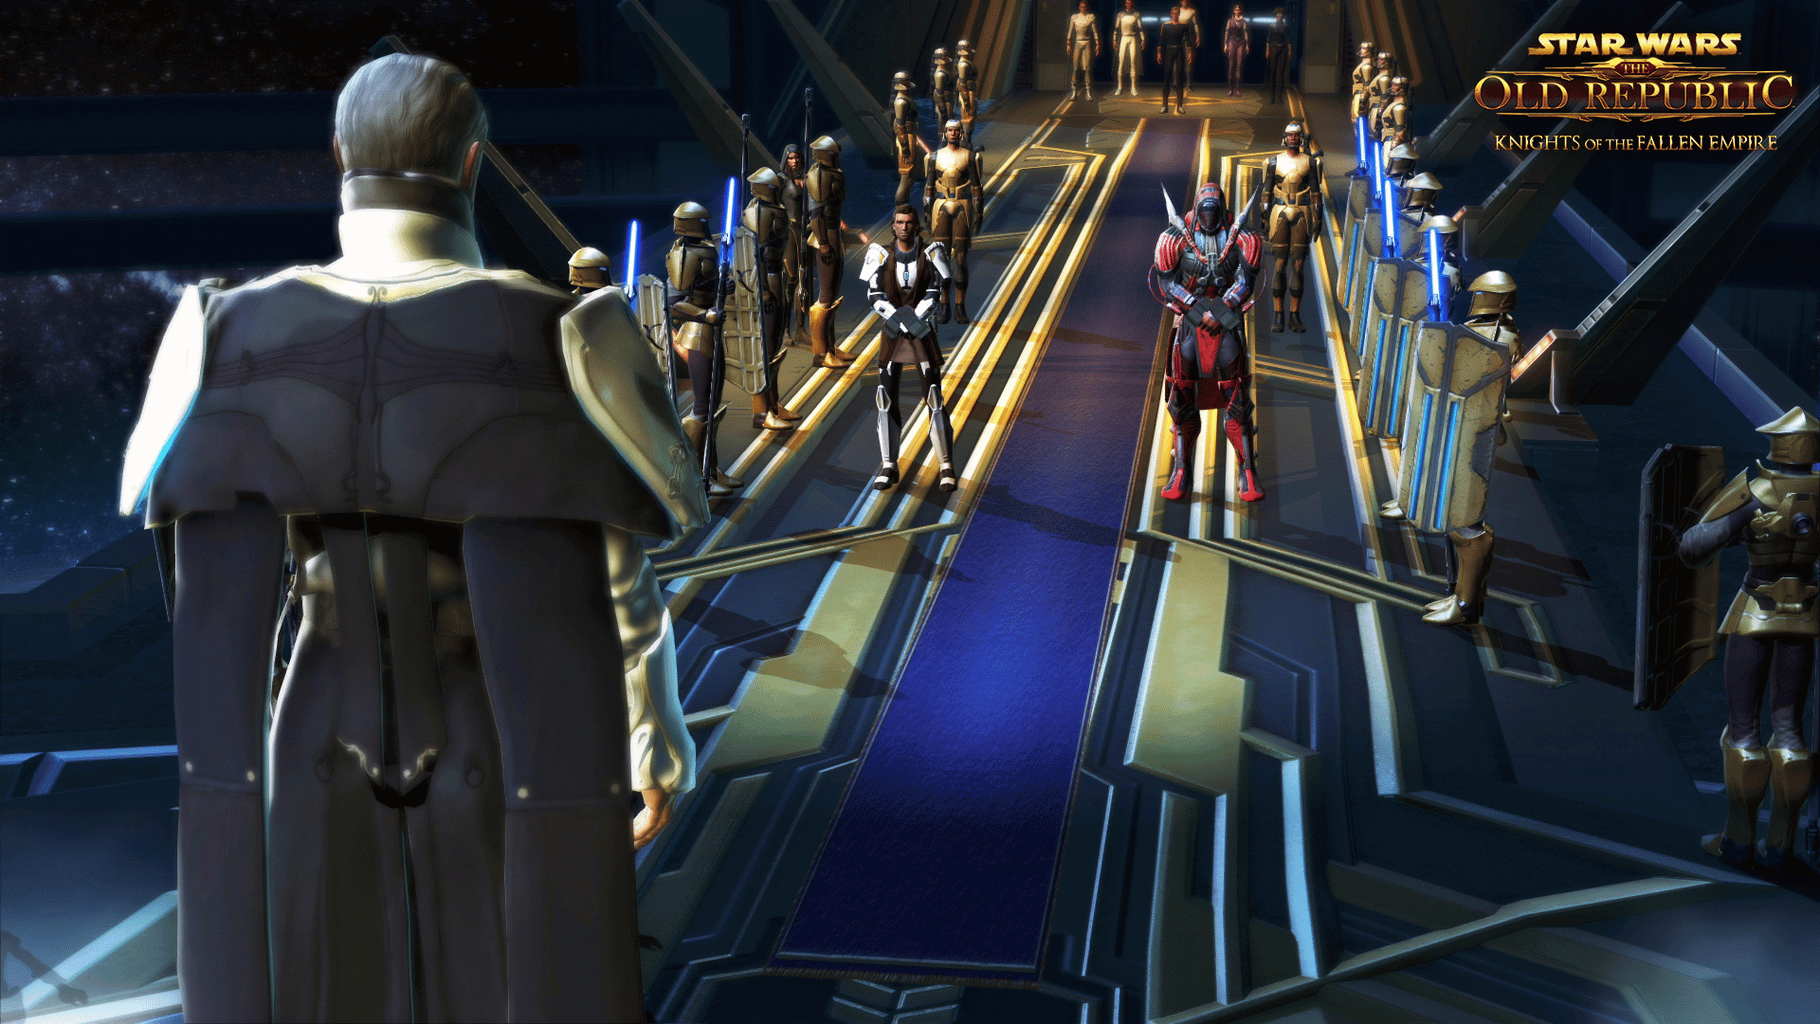 Star Wars: The Old Republic - Knights of the Fallen Empire screenshot